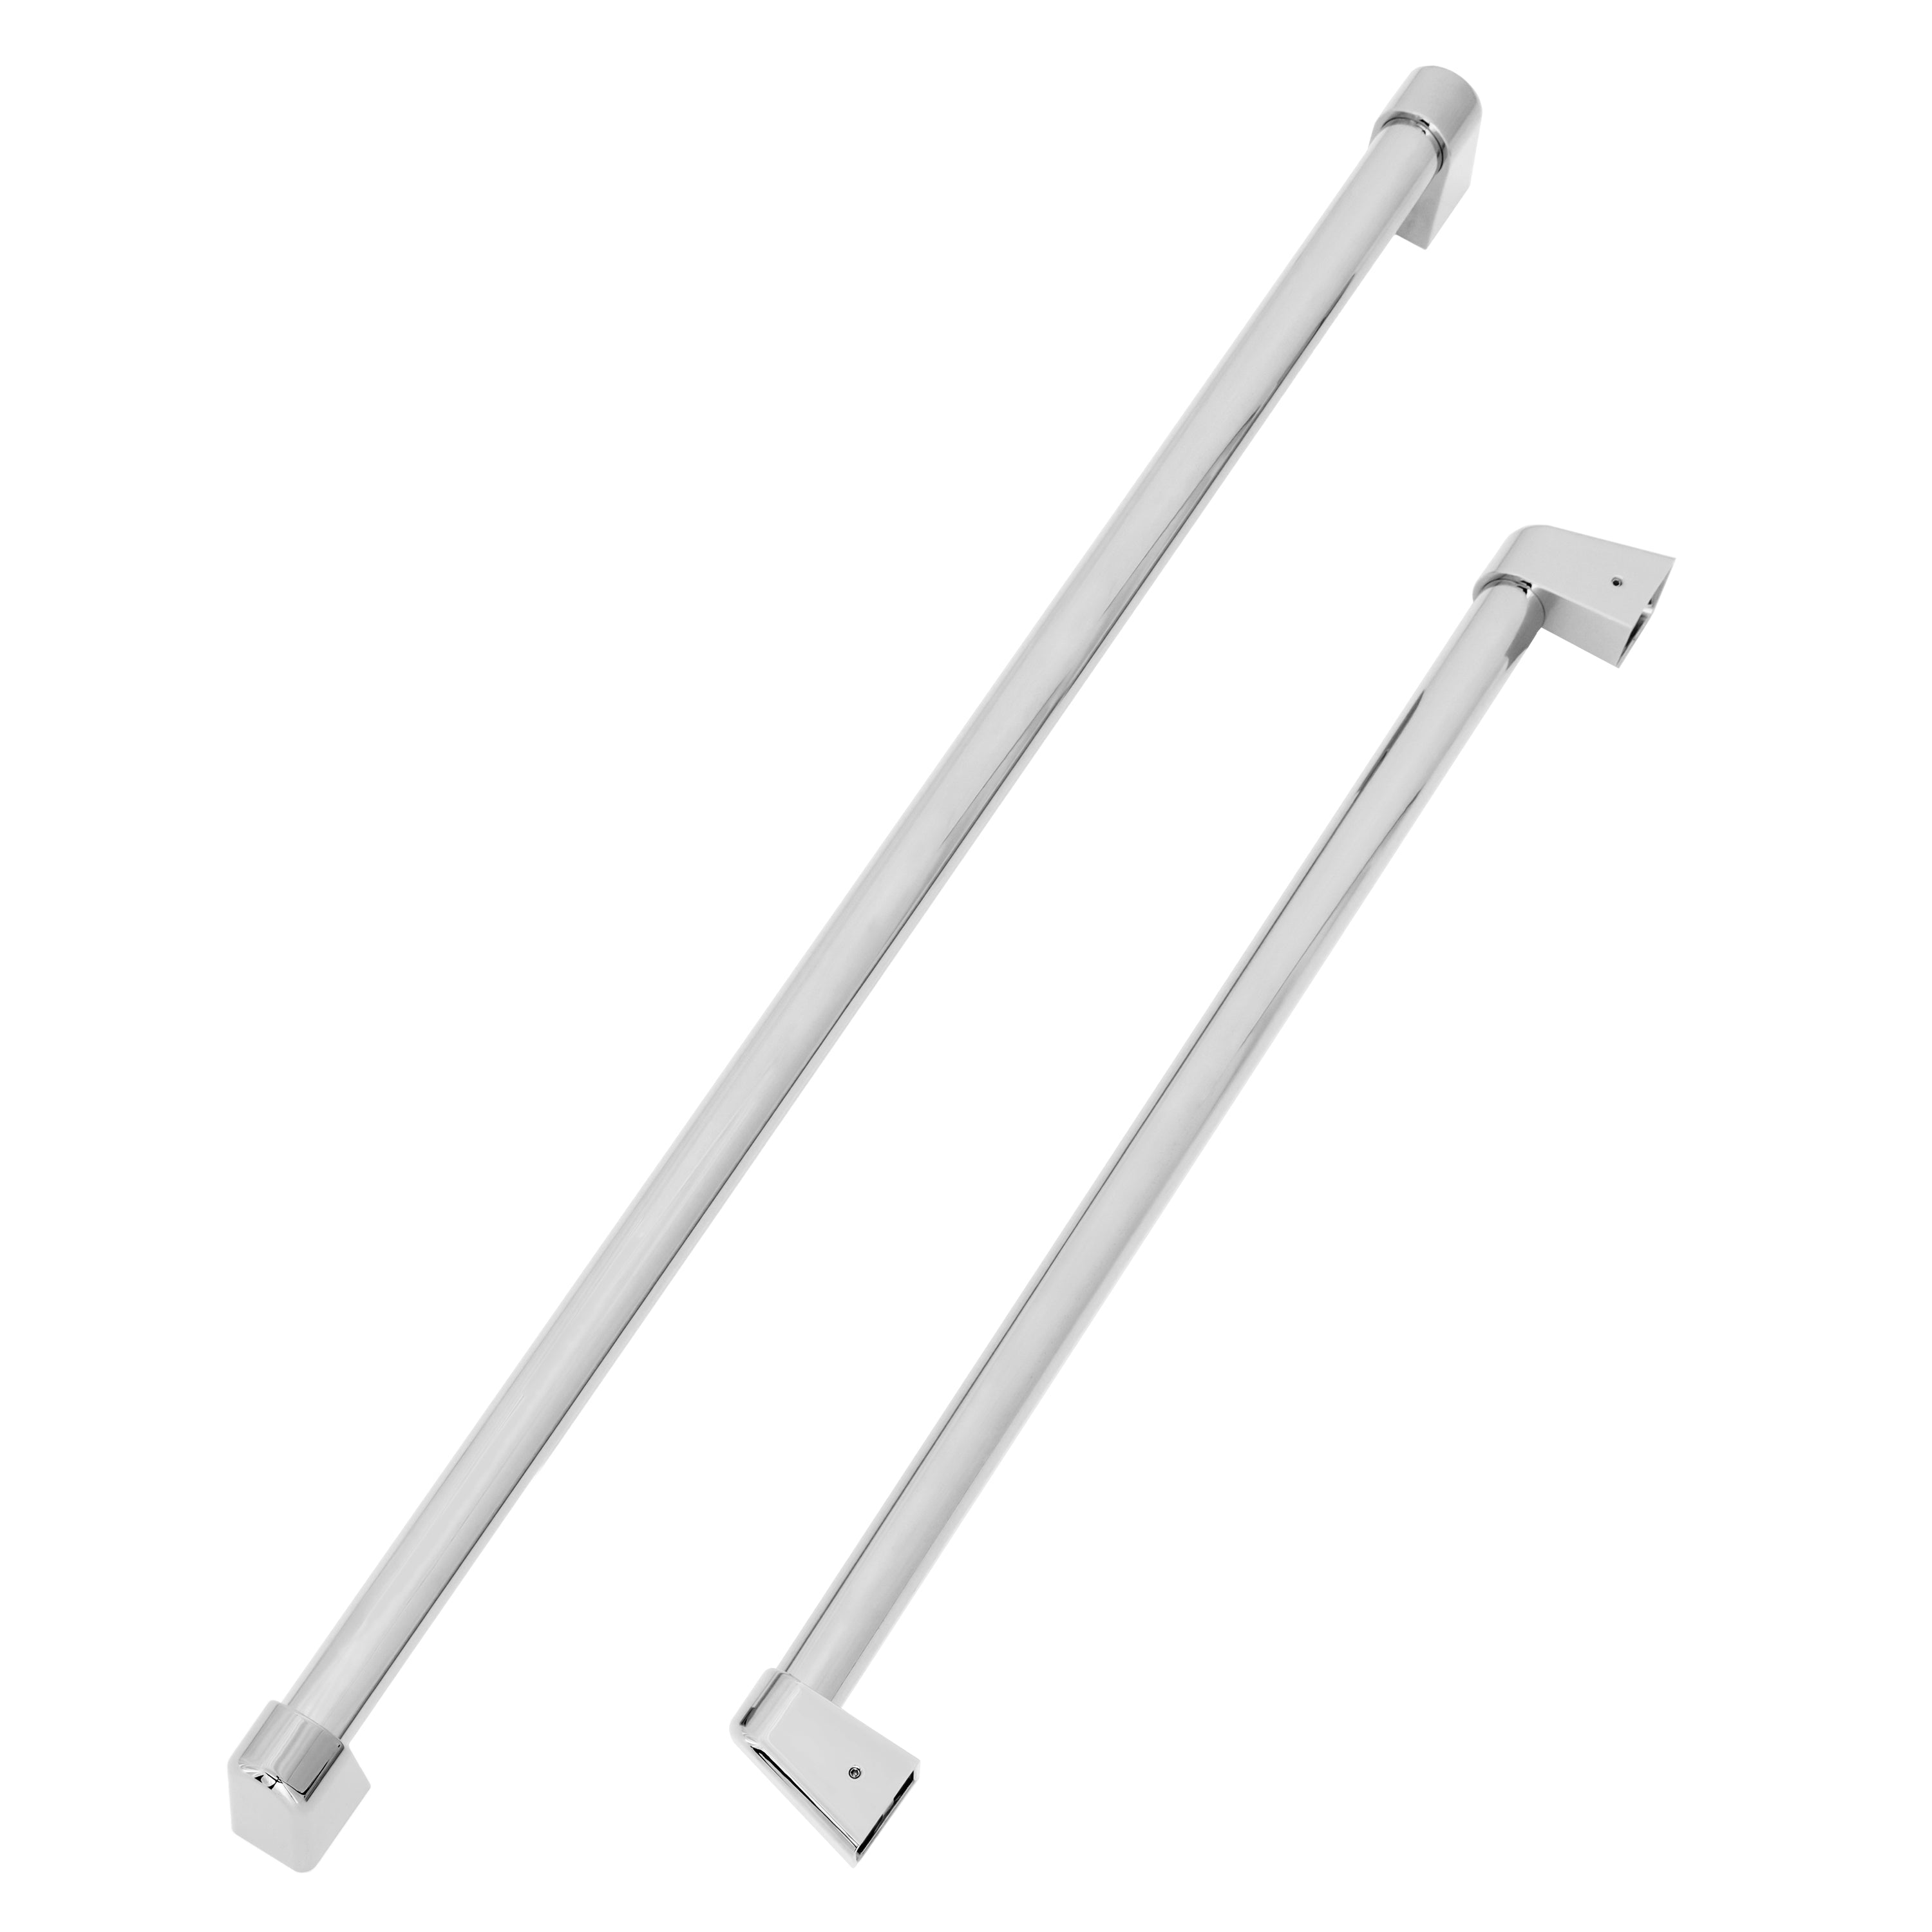 ZLINE 30" Refrigerator Panels in Stainless Steel for a 30" Buit-in Refrigerator (RPBIV-304-30)